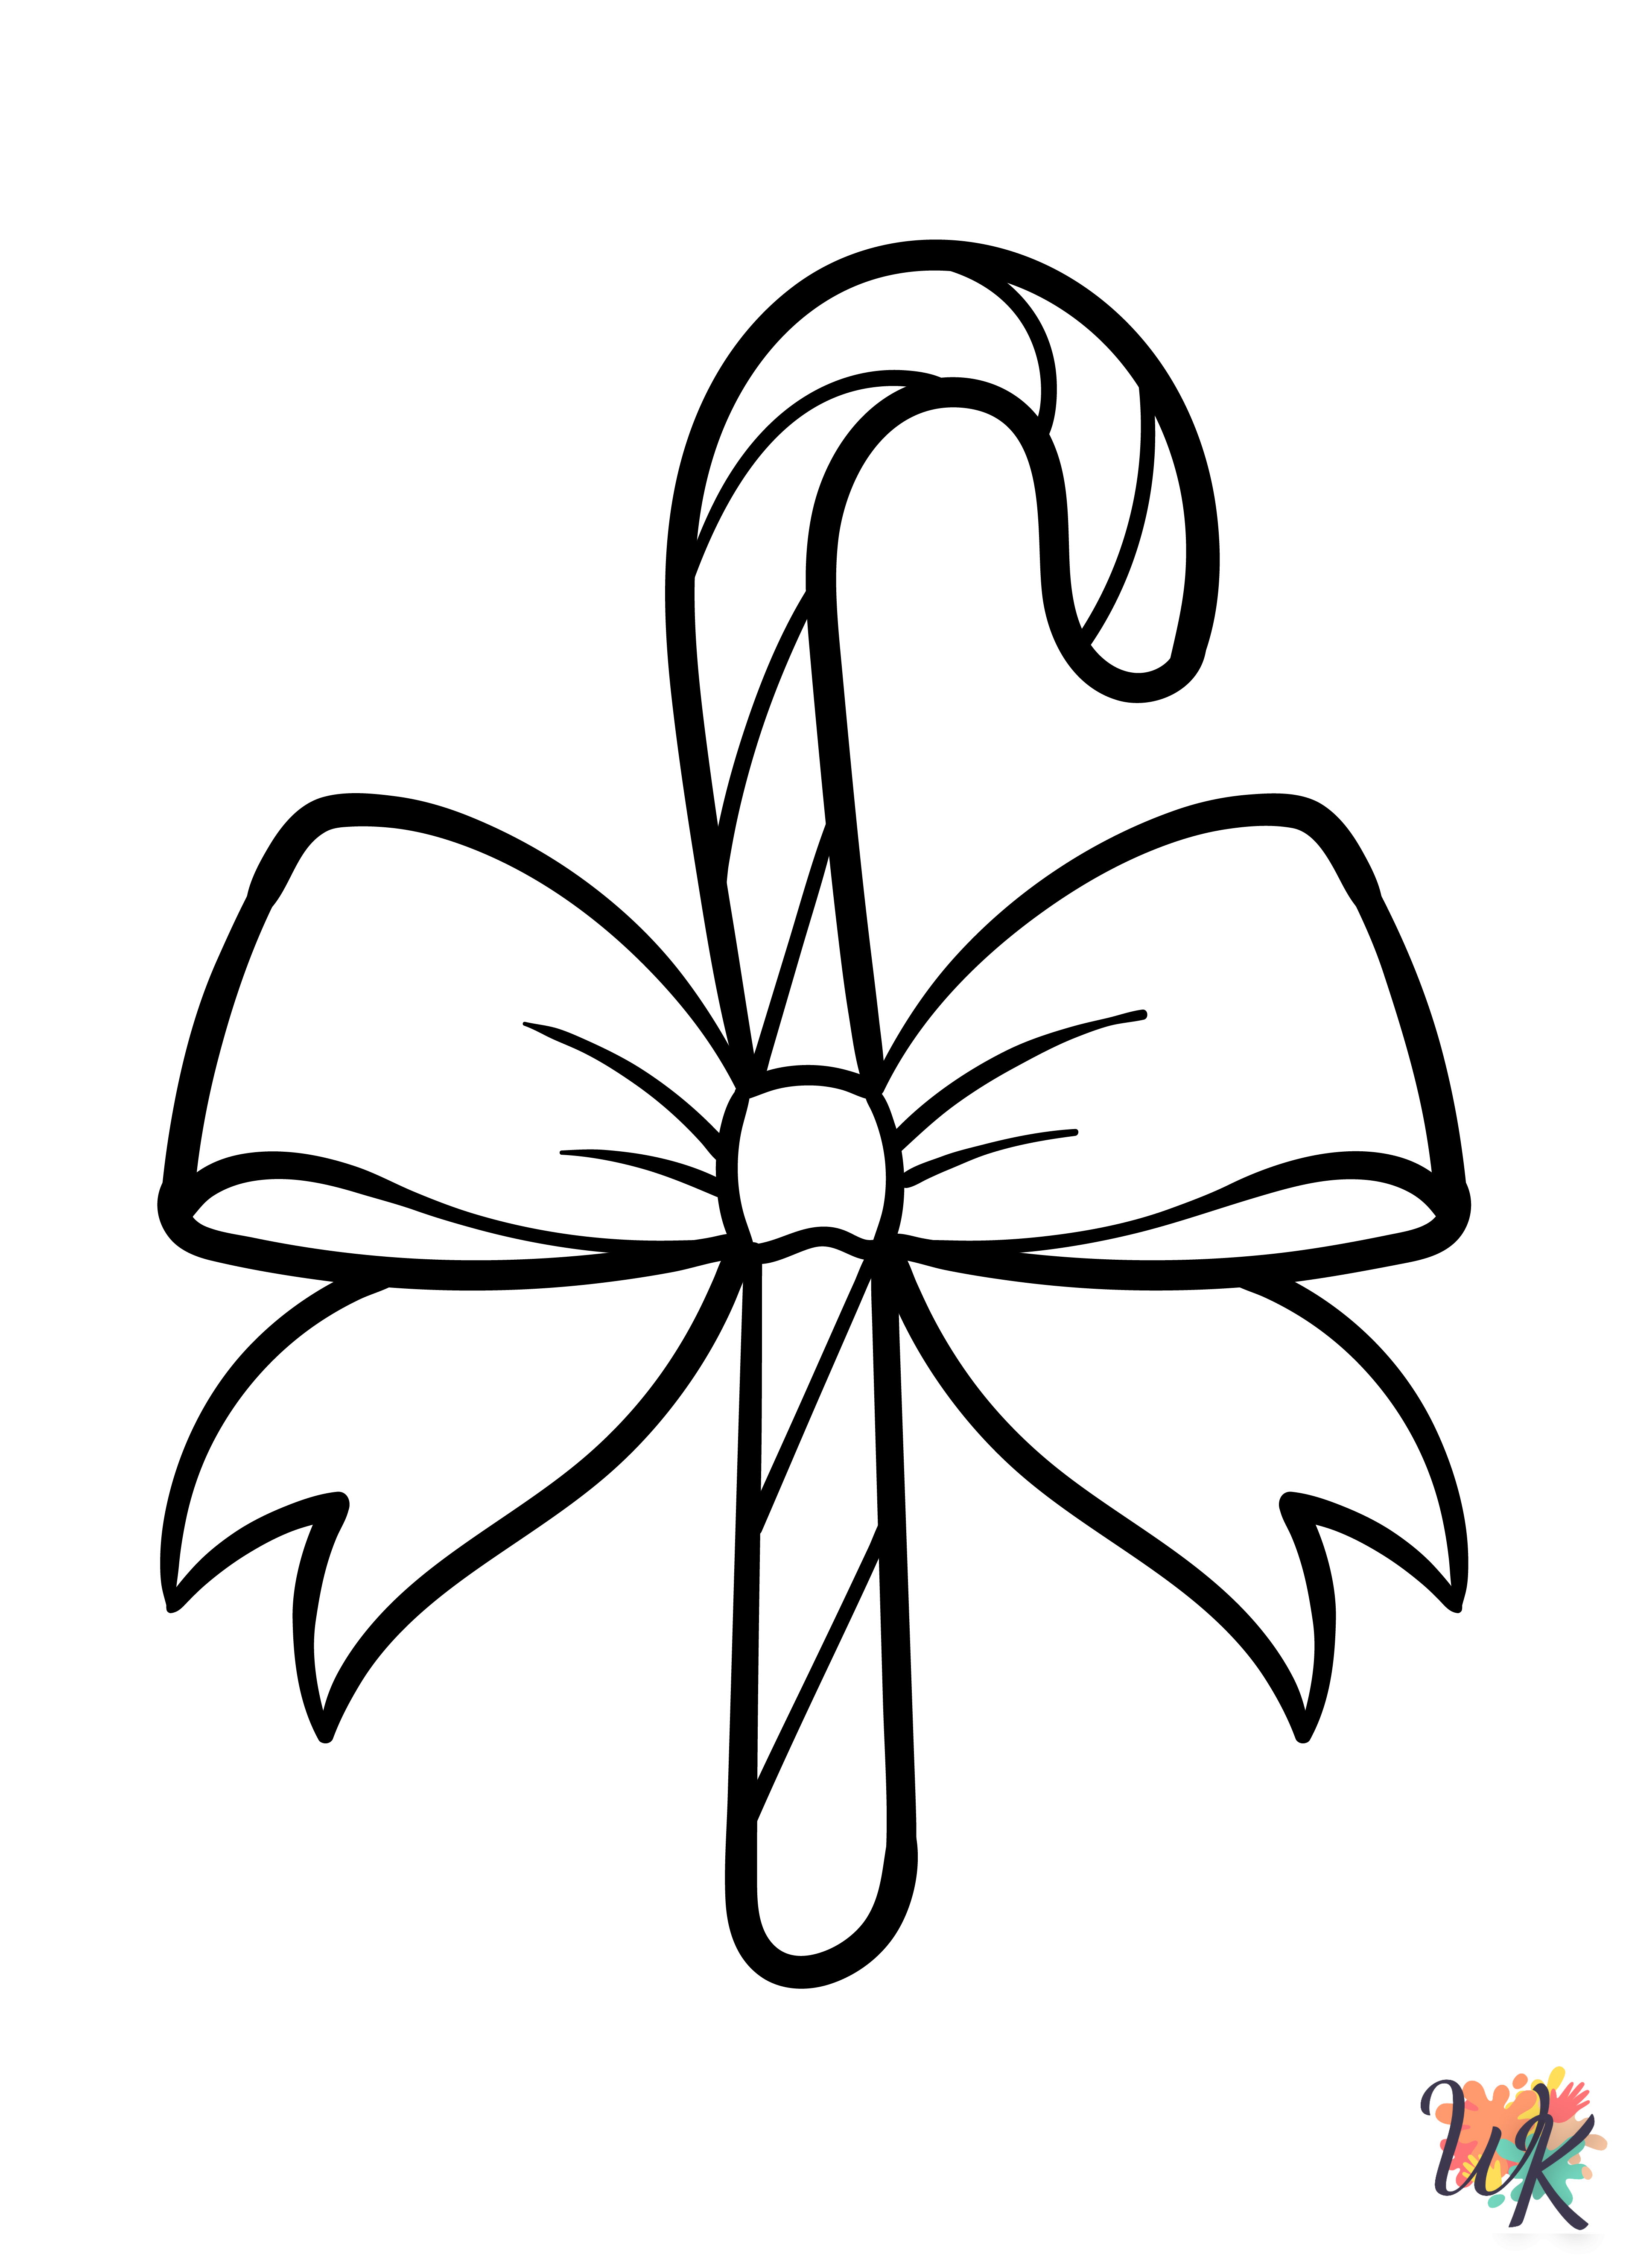 Candy Cane coloring pages to print